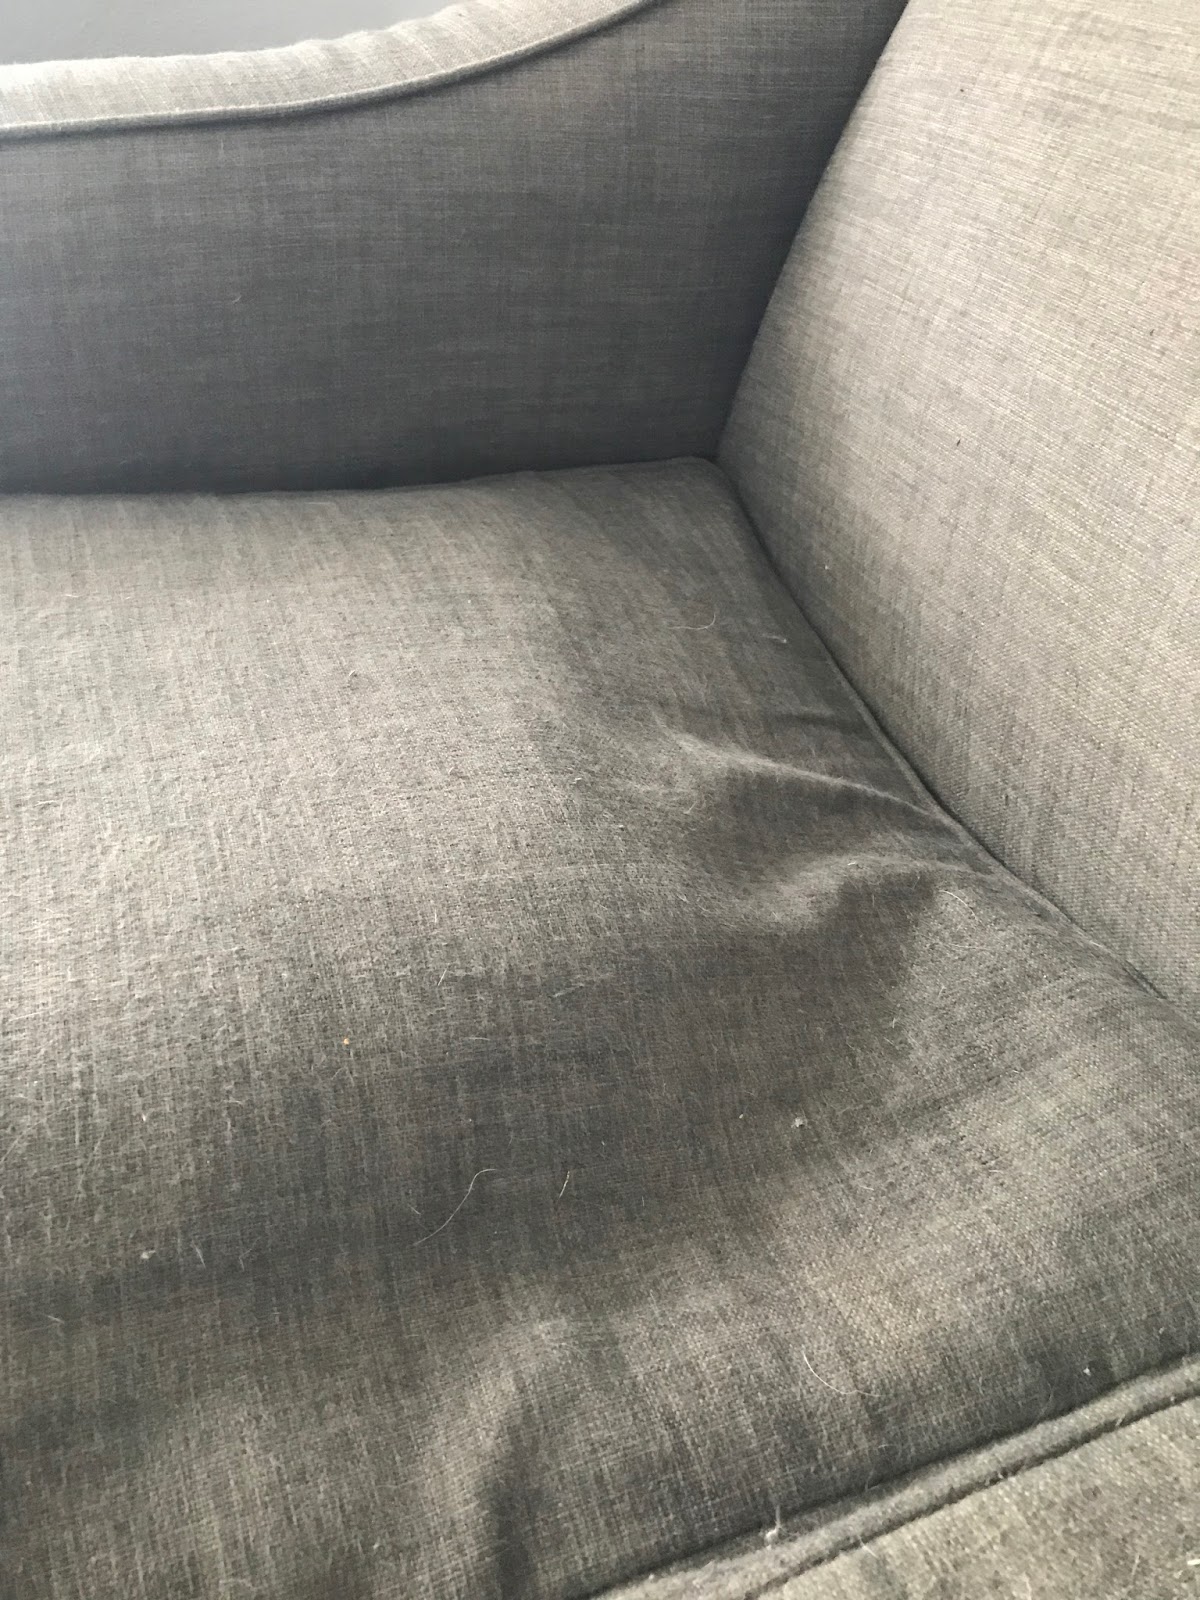 How To Replace Foam In Couch Cushions